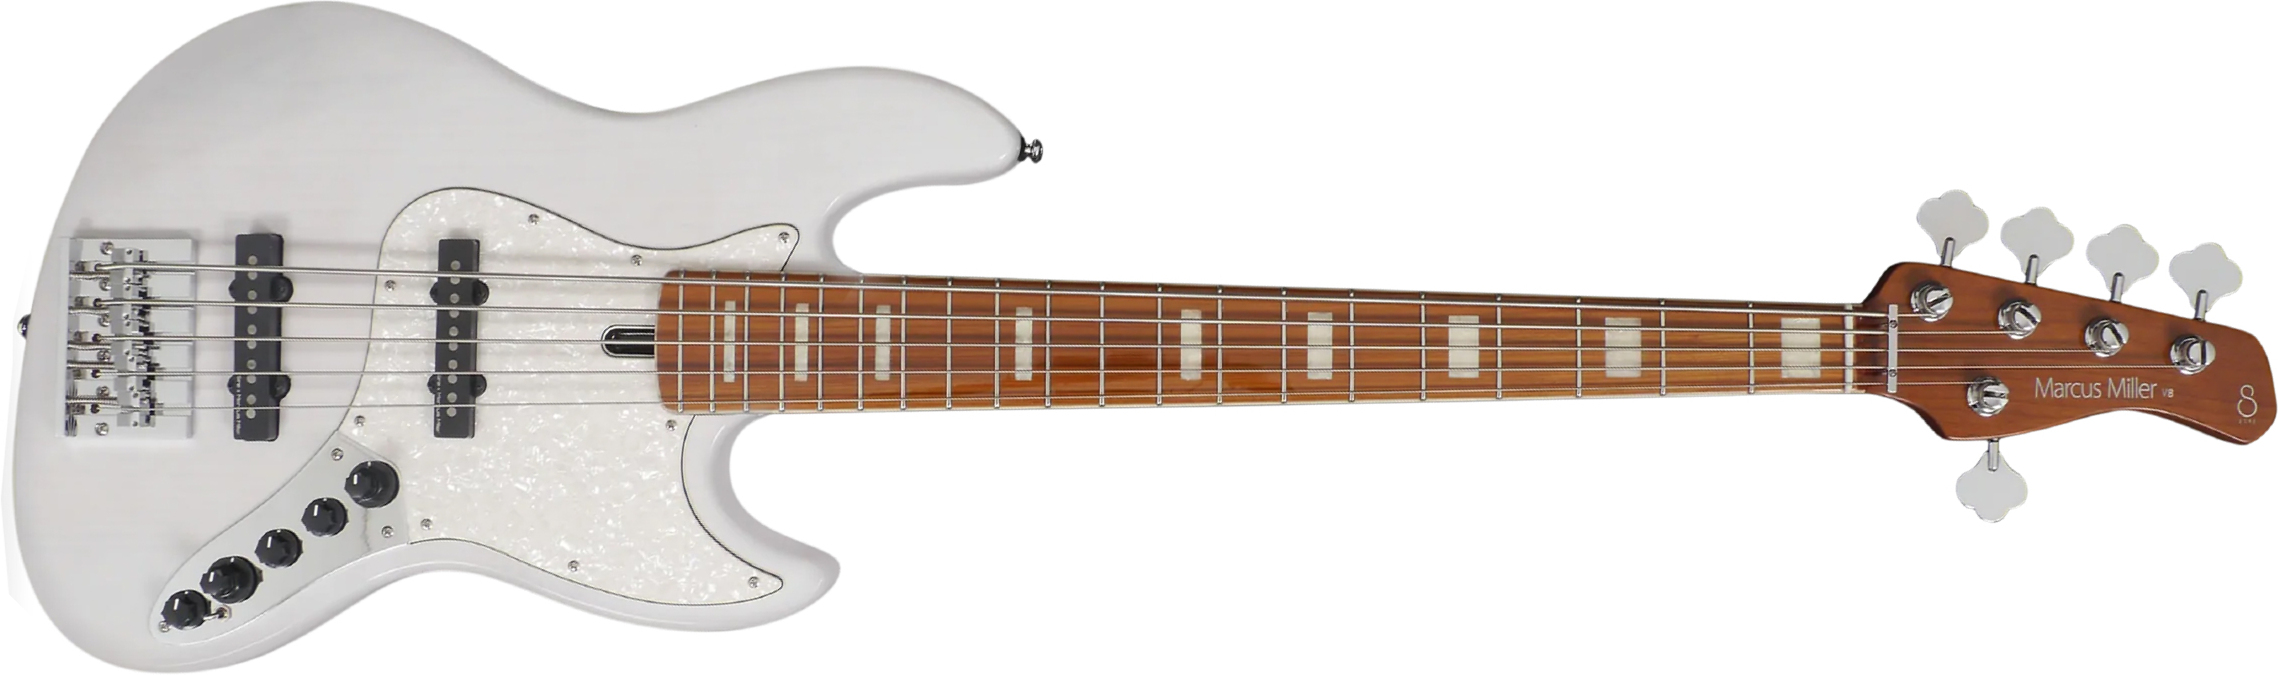 Marcus Miller V8 5st 5c Active Mn - White Blonde - Solid body electric bass - Main picture